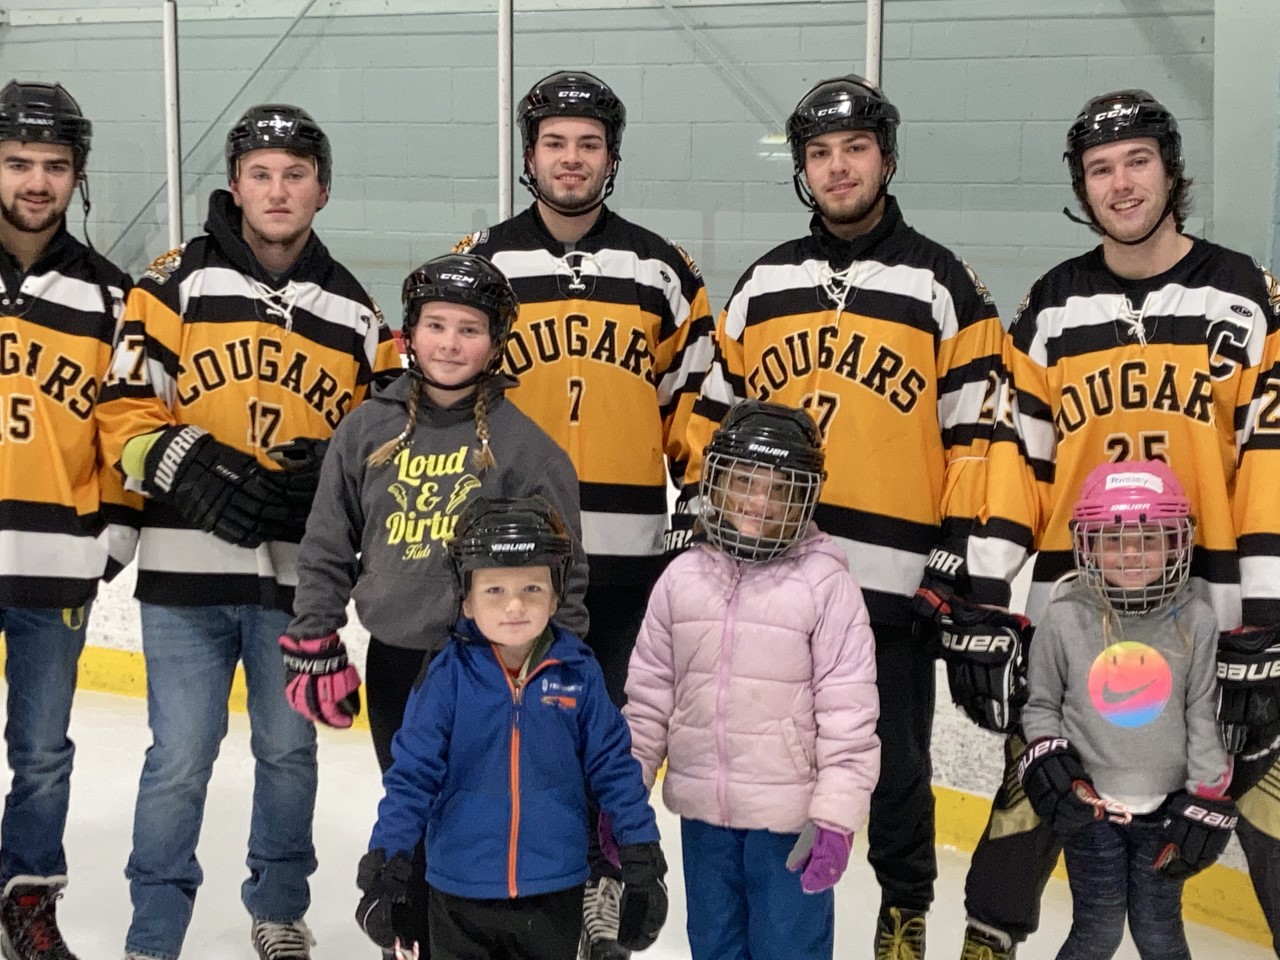 Skating with the Cougars for a good cause